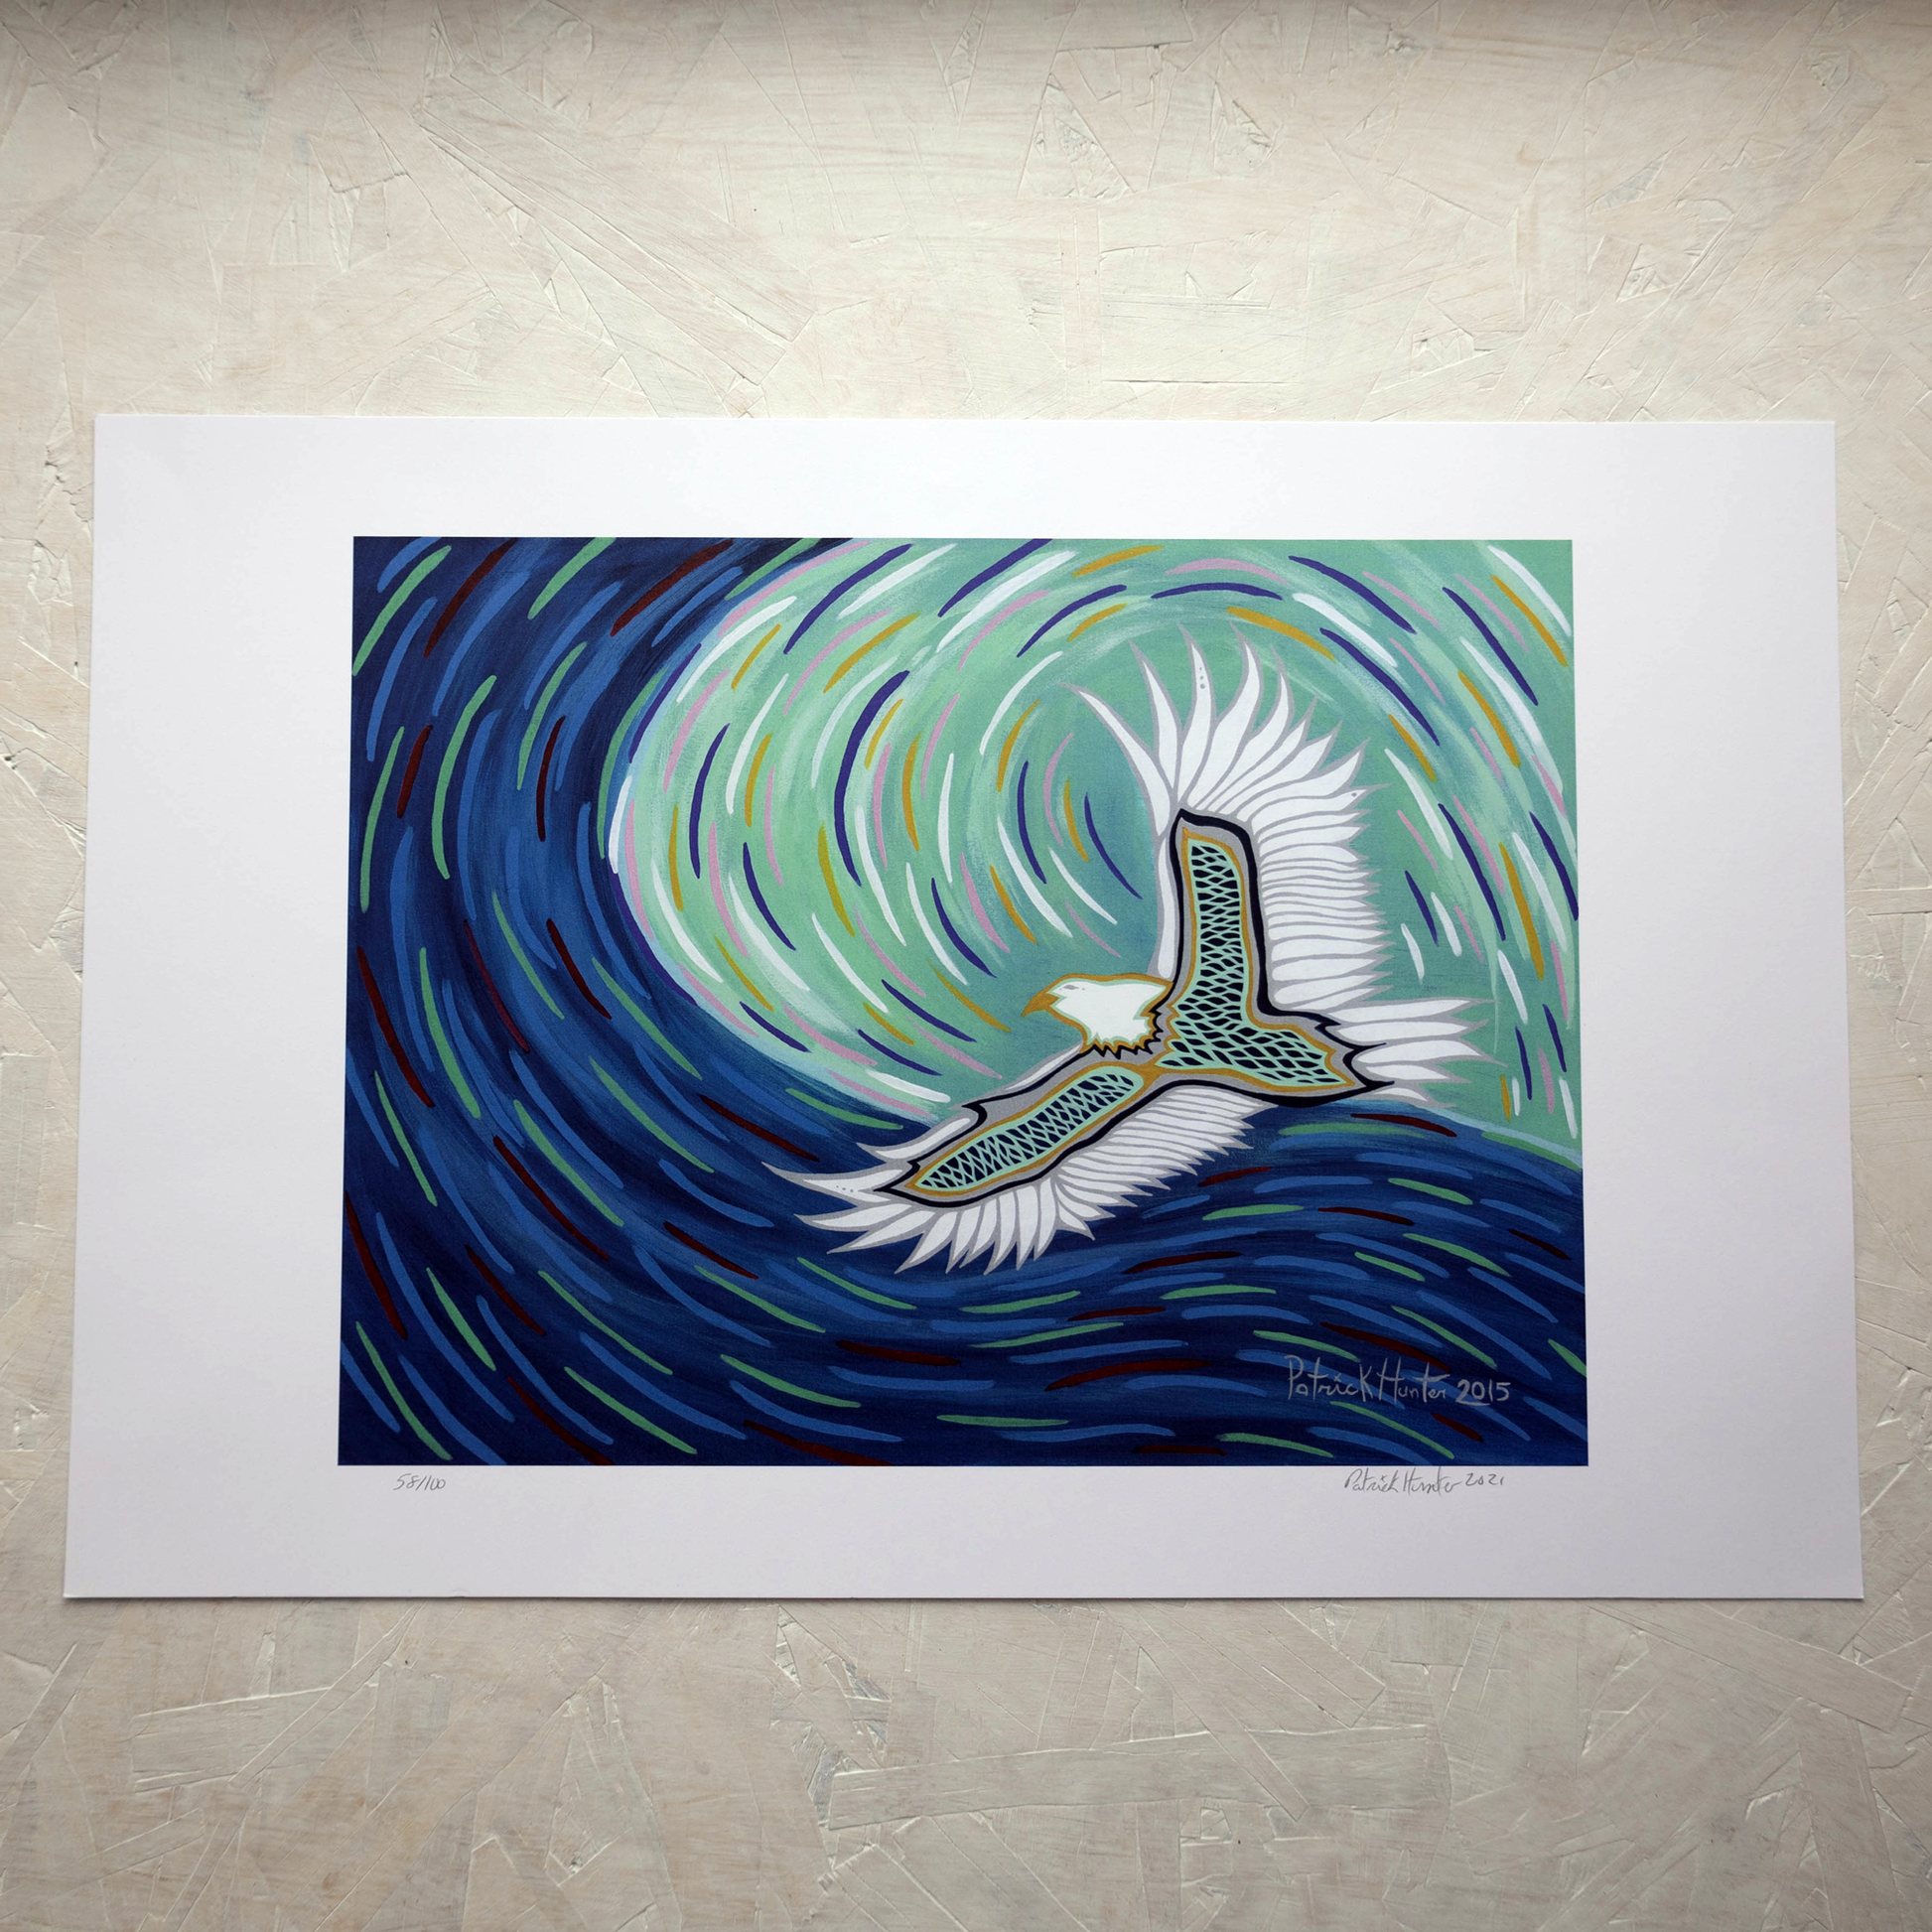 Print of Patrick Hunter's painting of an eagle in flight against a duotone blue sky, woodland art style.